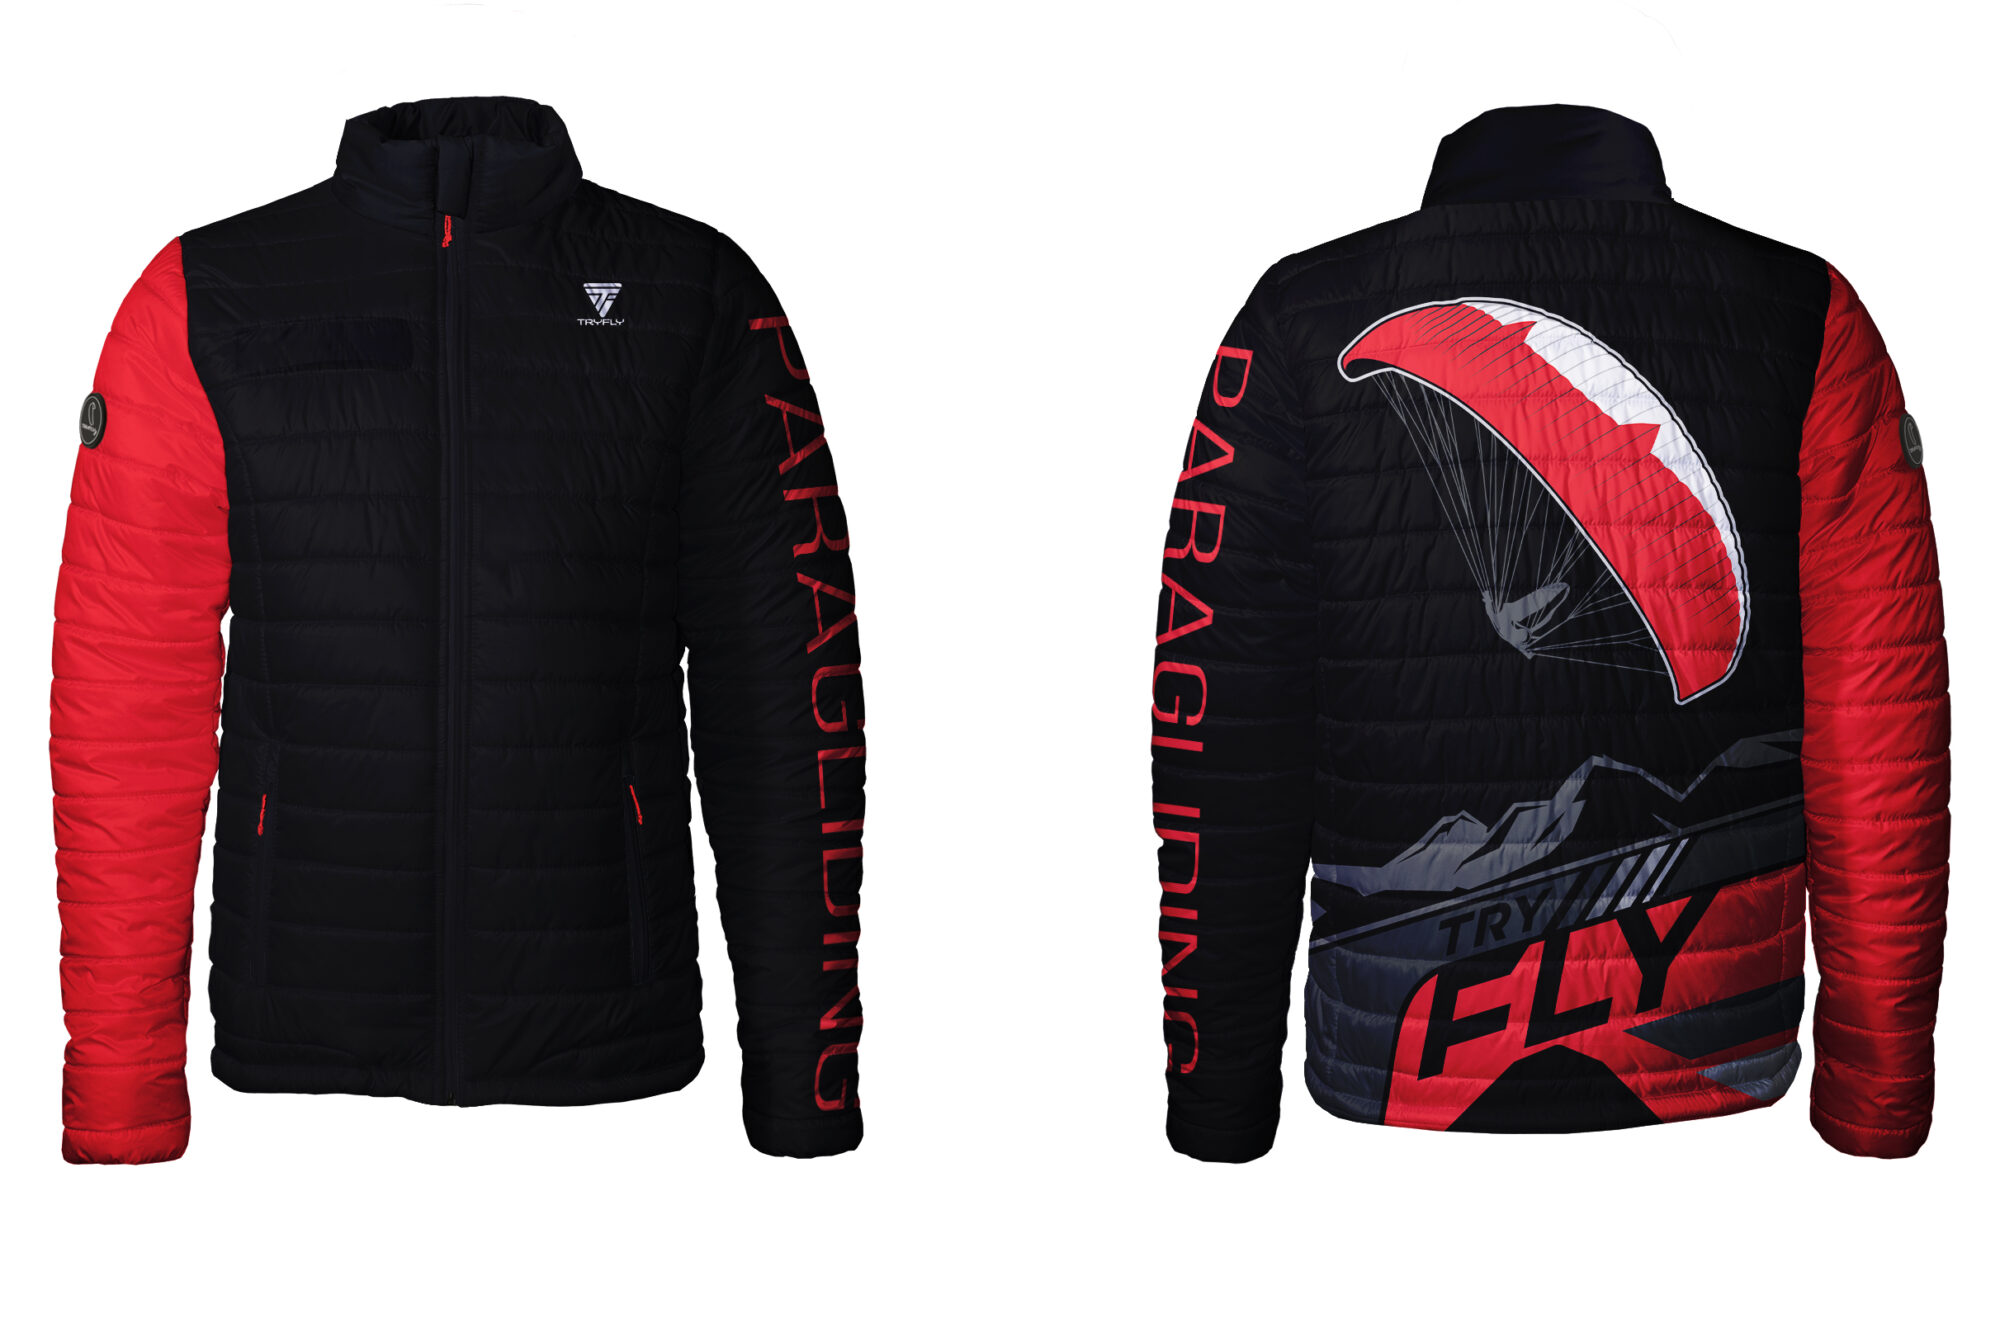 THERMAL Jacket PG - TryFly Paragliding and Skydiving Wear Paragliding ...